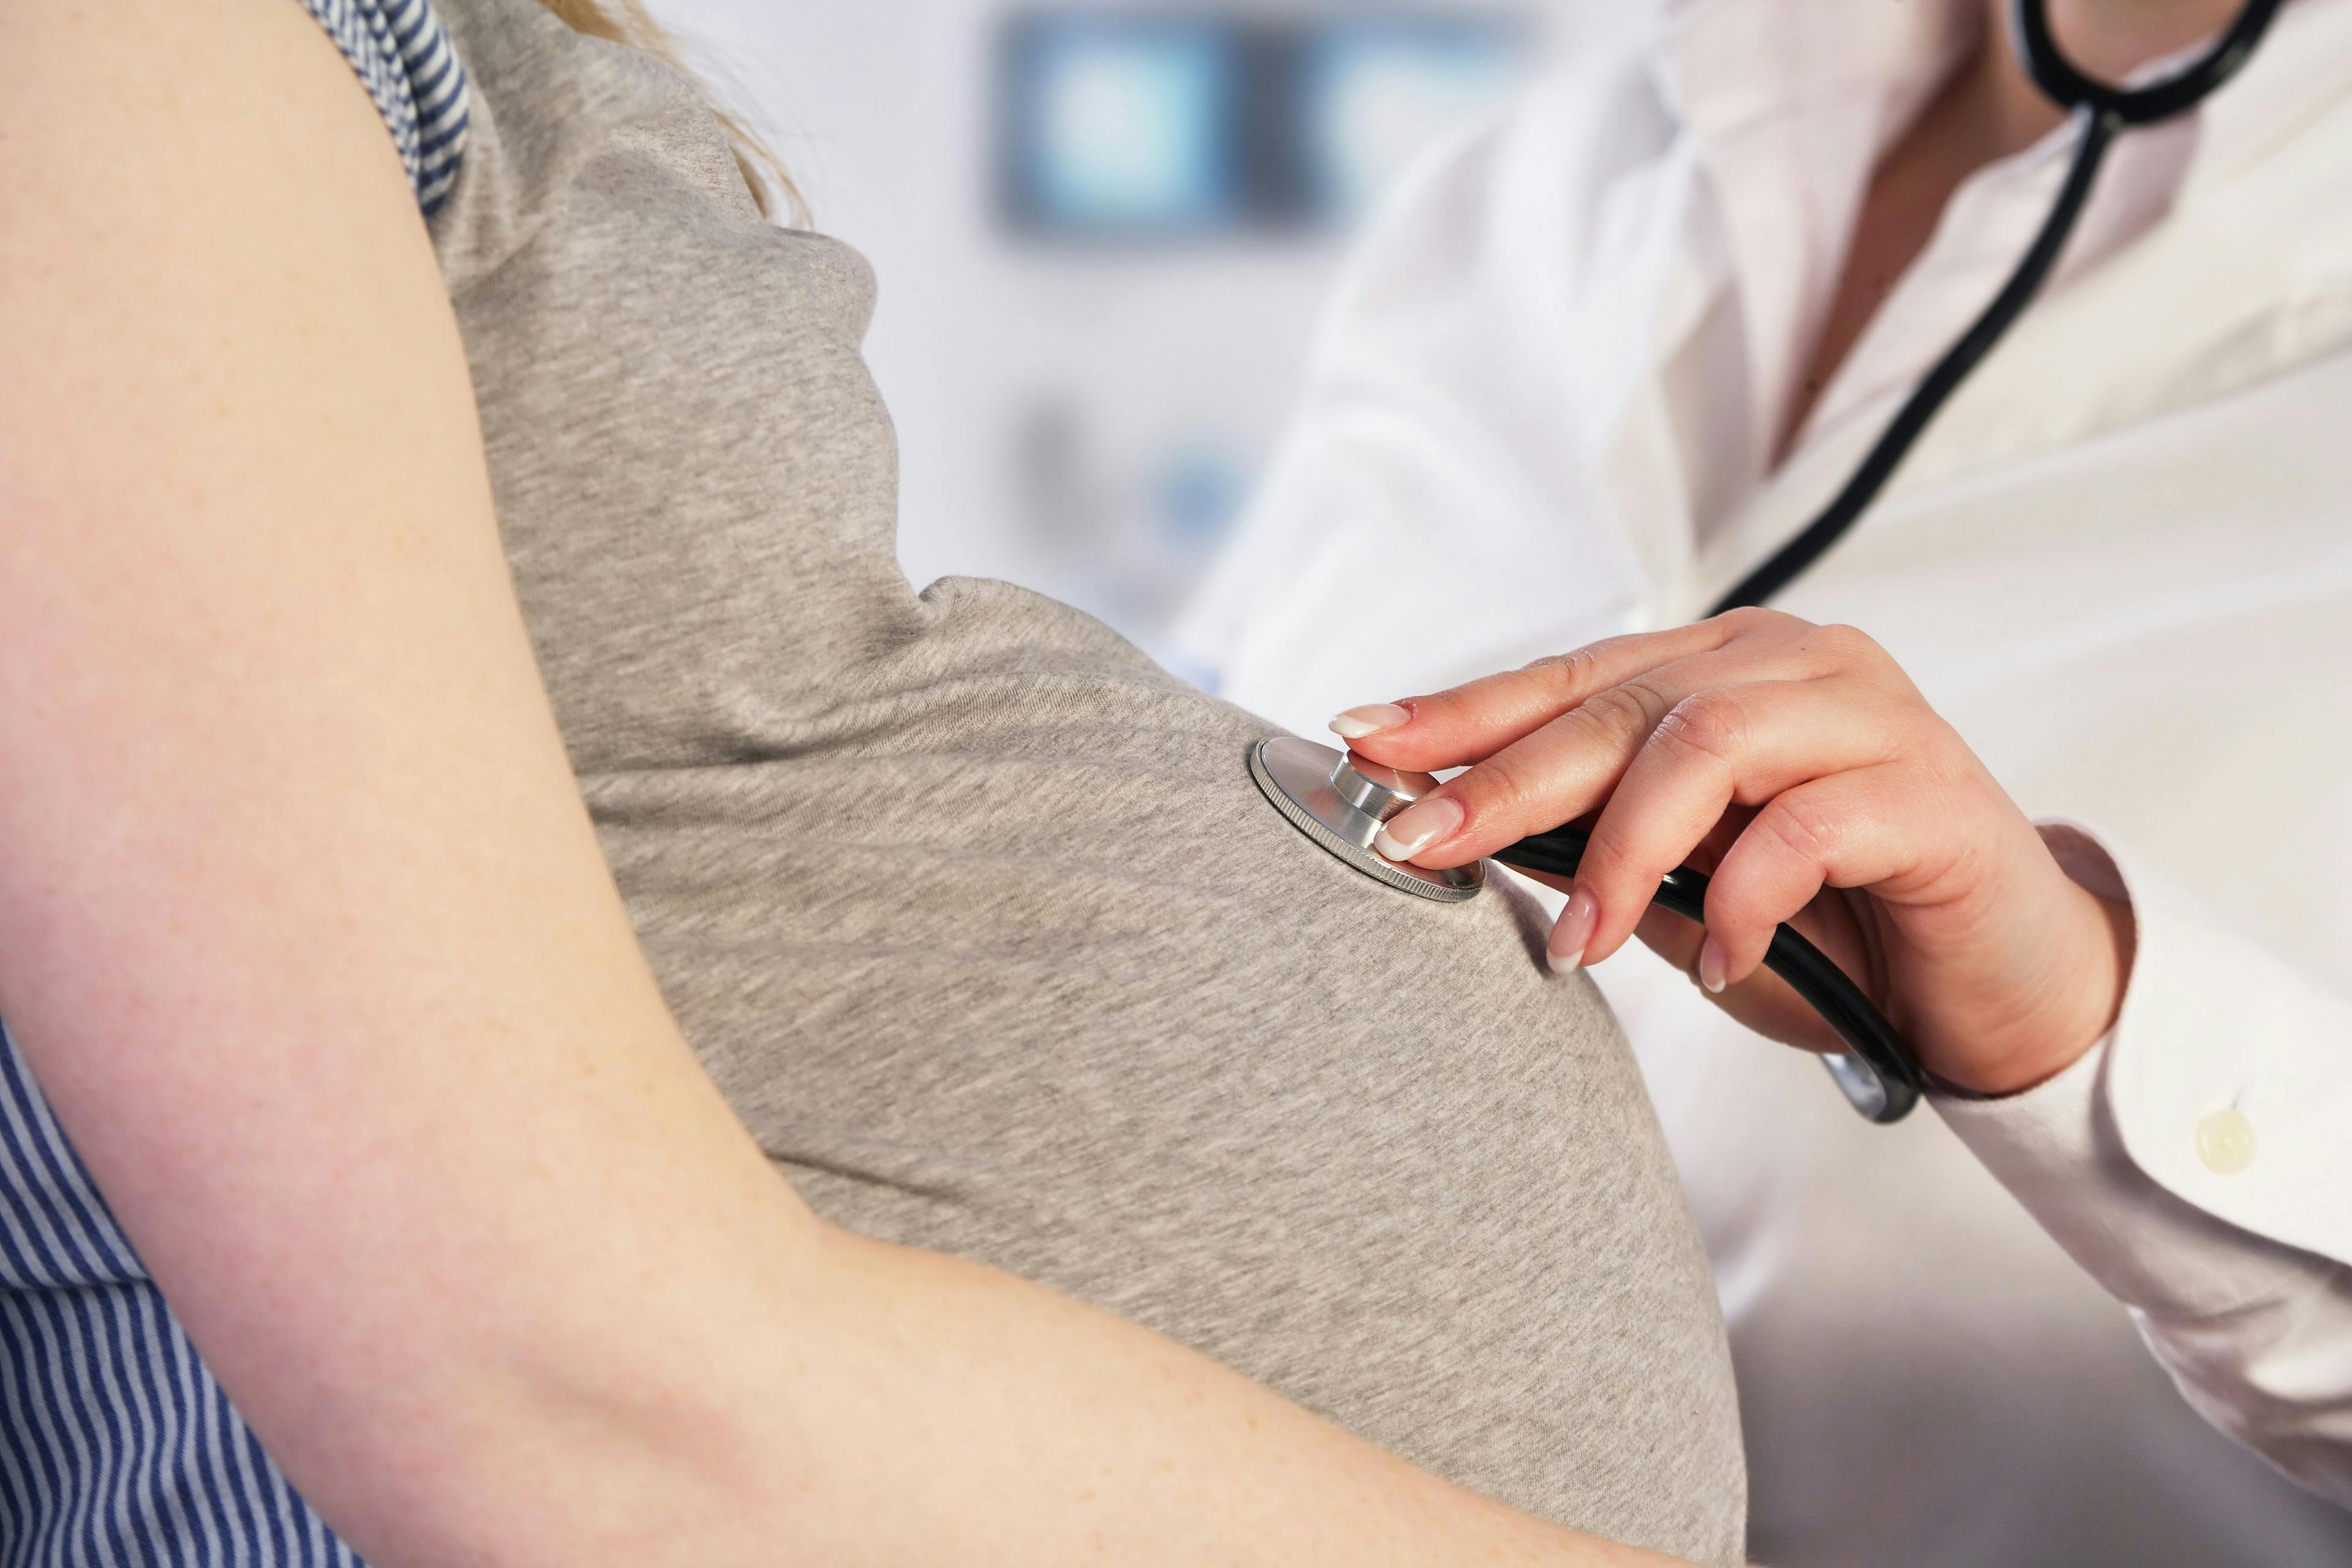 Fetal and Maternal Factors Must Be Considered In Melanoma Management, ASCO Posters Argue